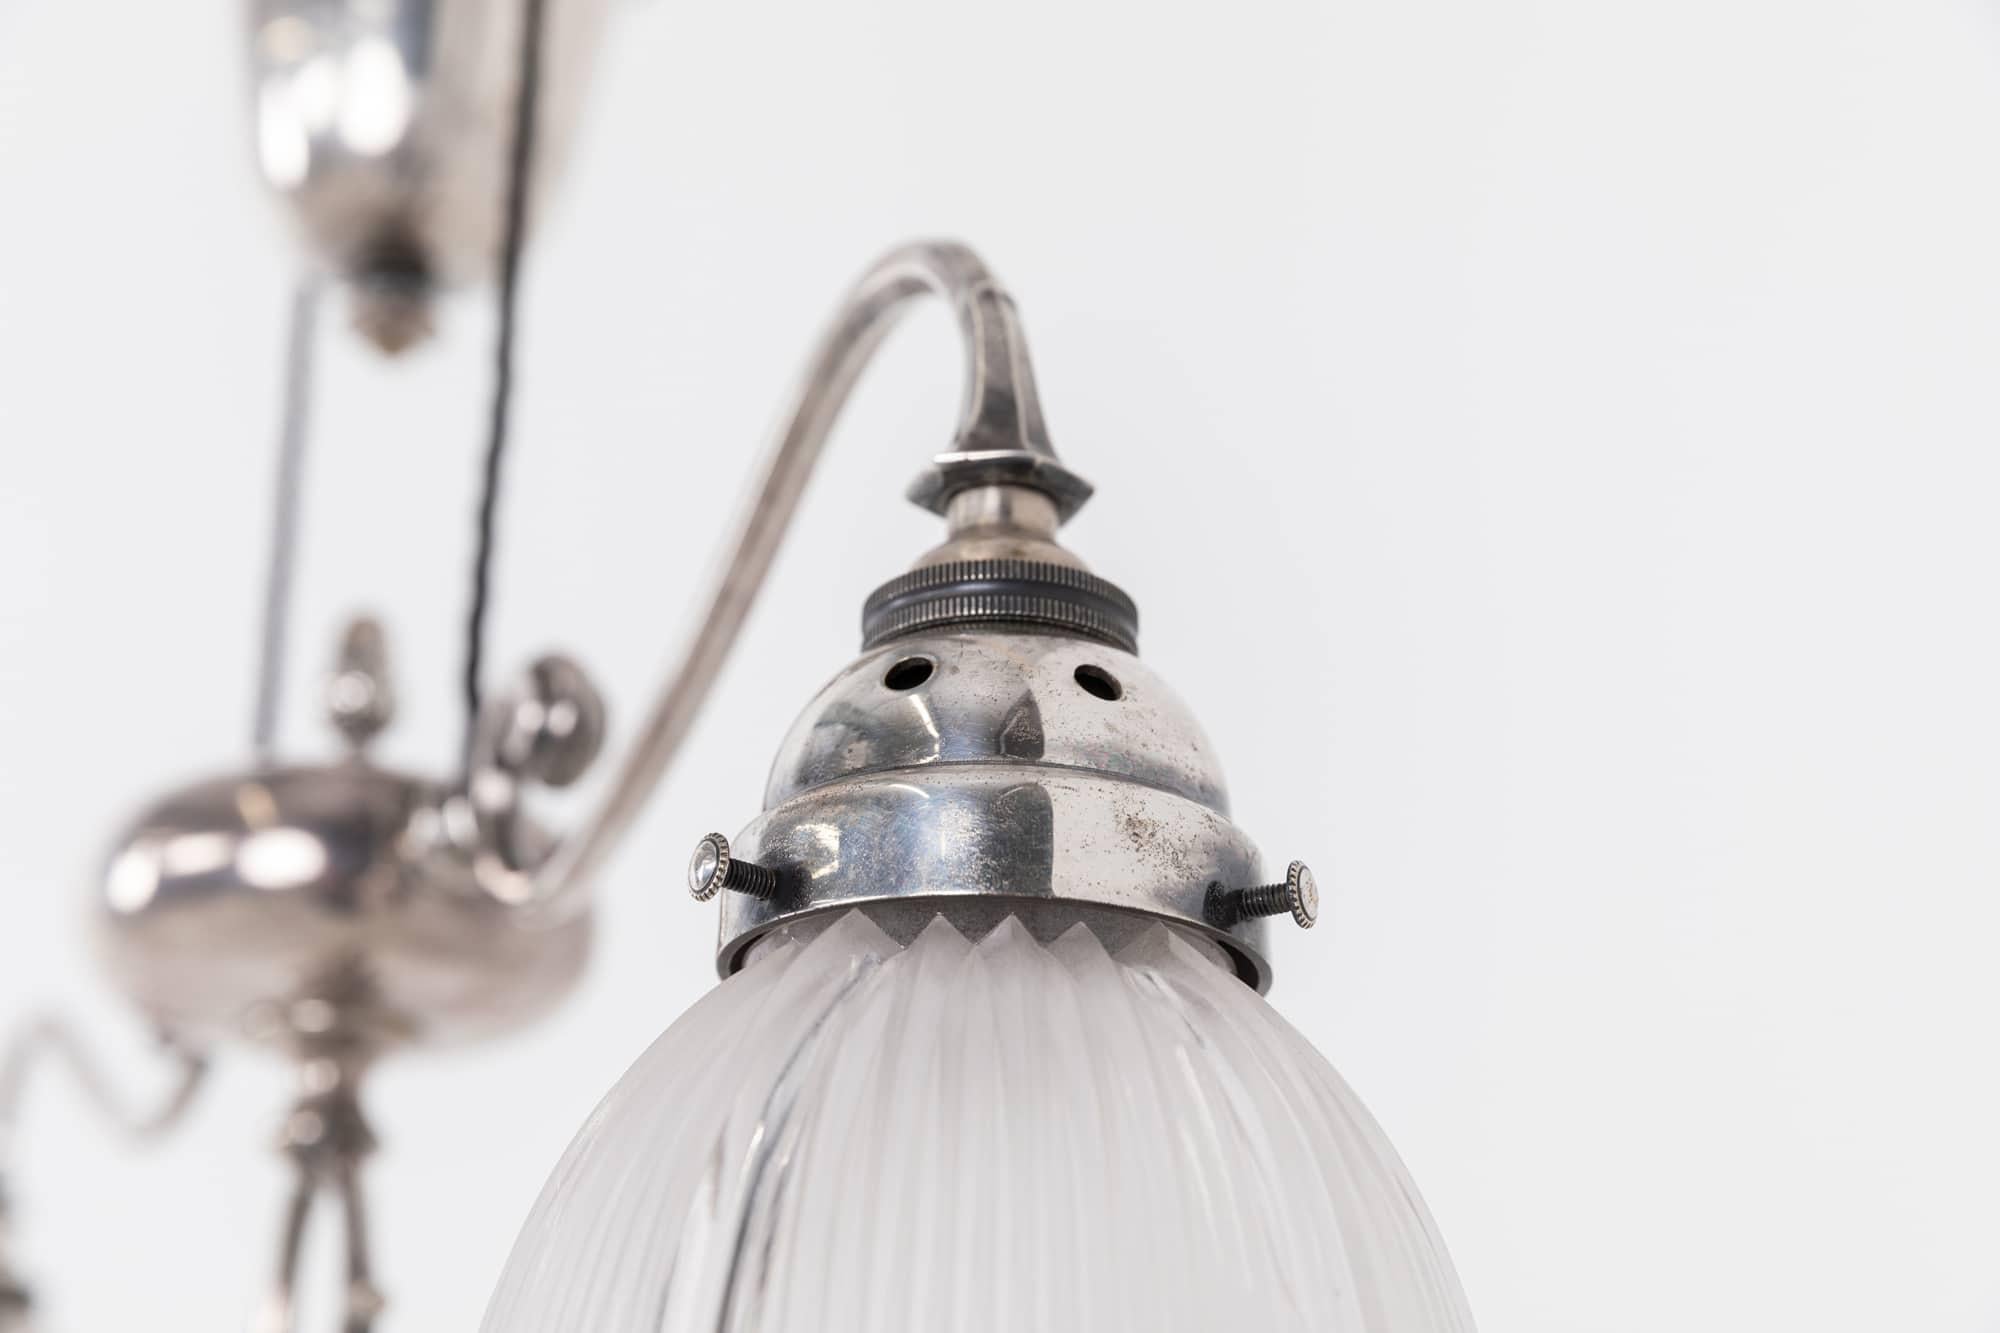 Early 20th Century Edwardian Faraday & Son Rise and Fall Prismatic Glass Ceiling Light Lamp, c.1910